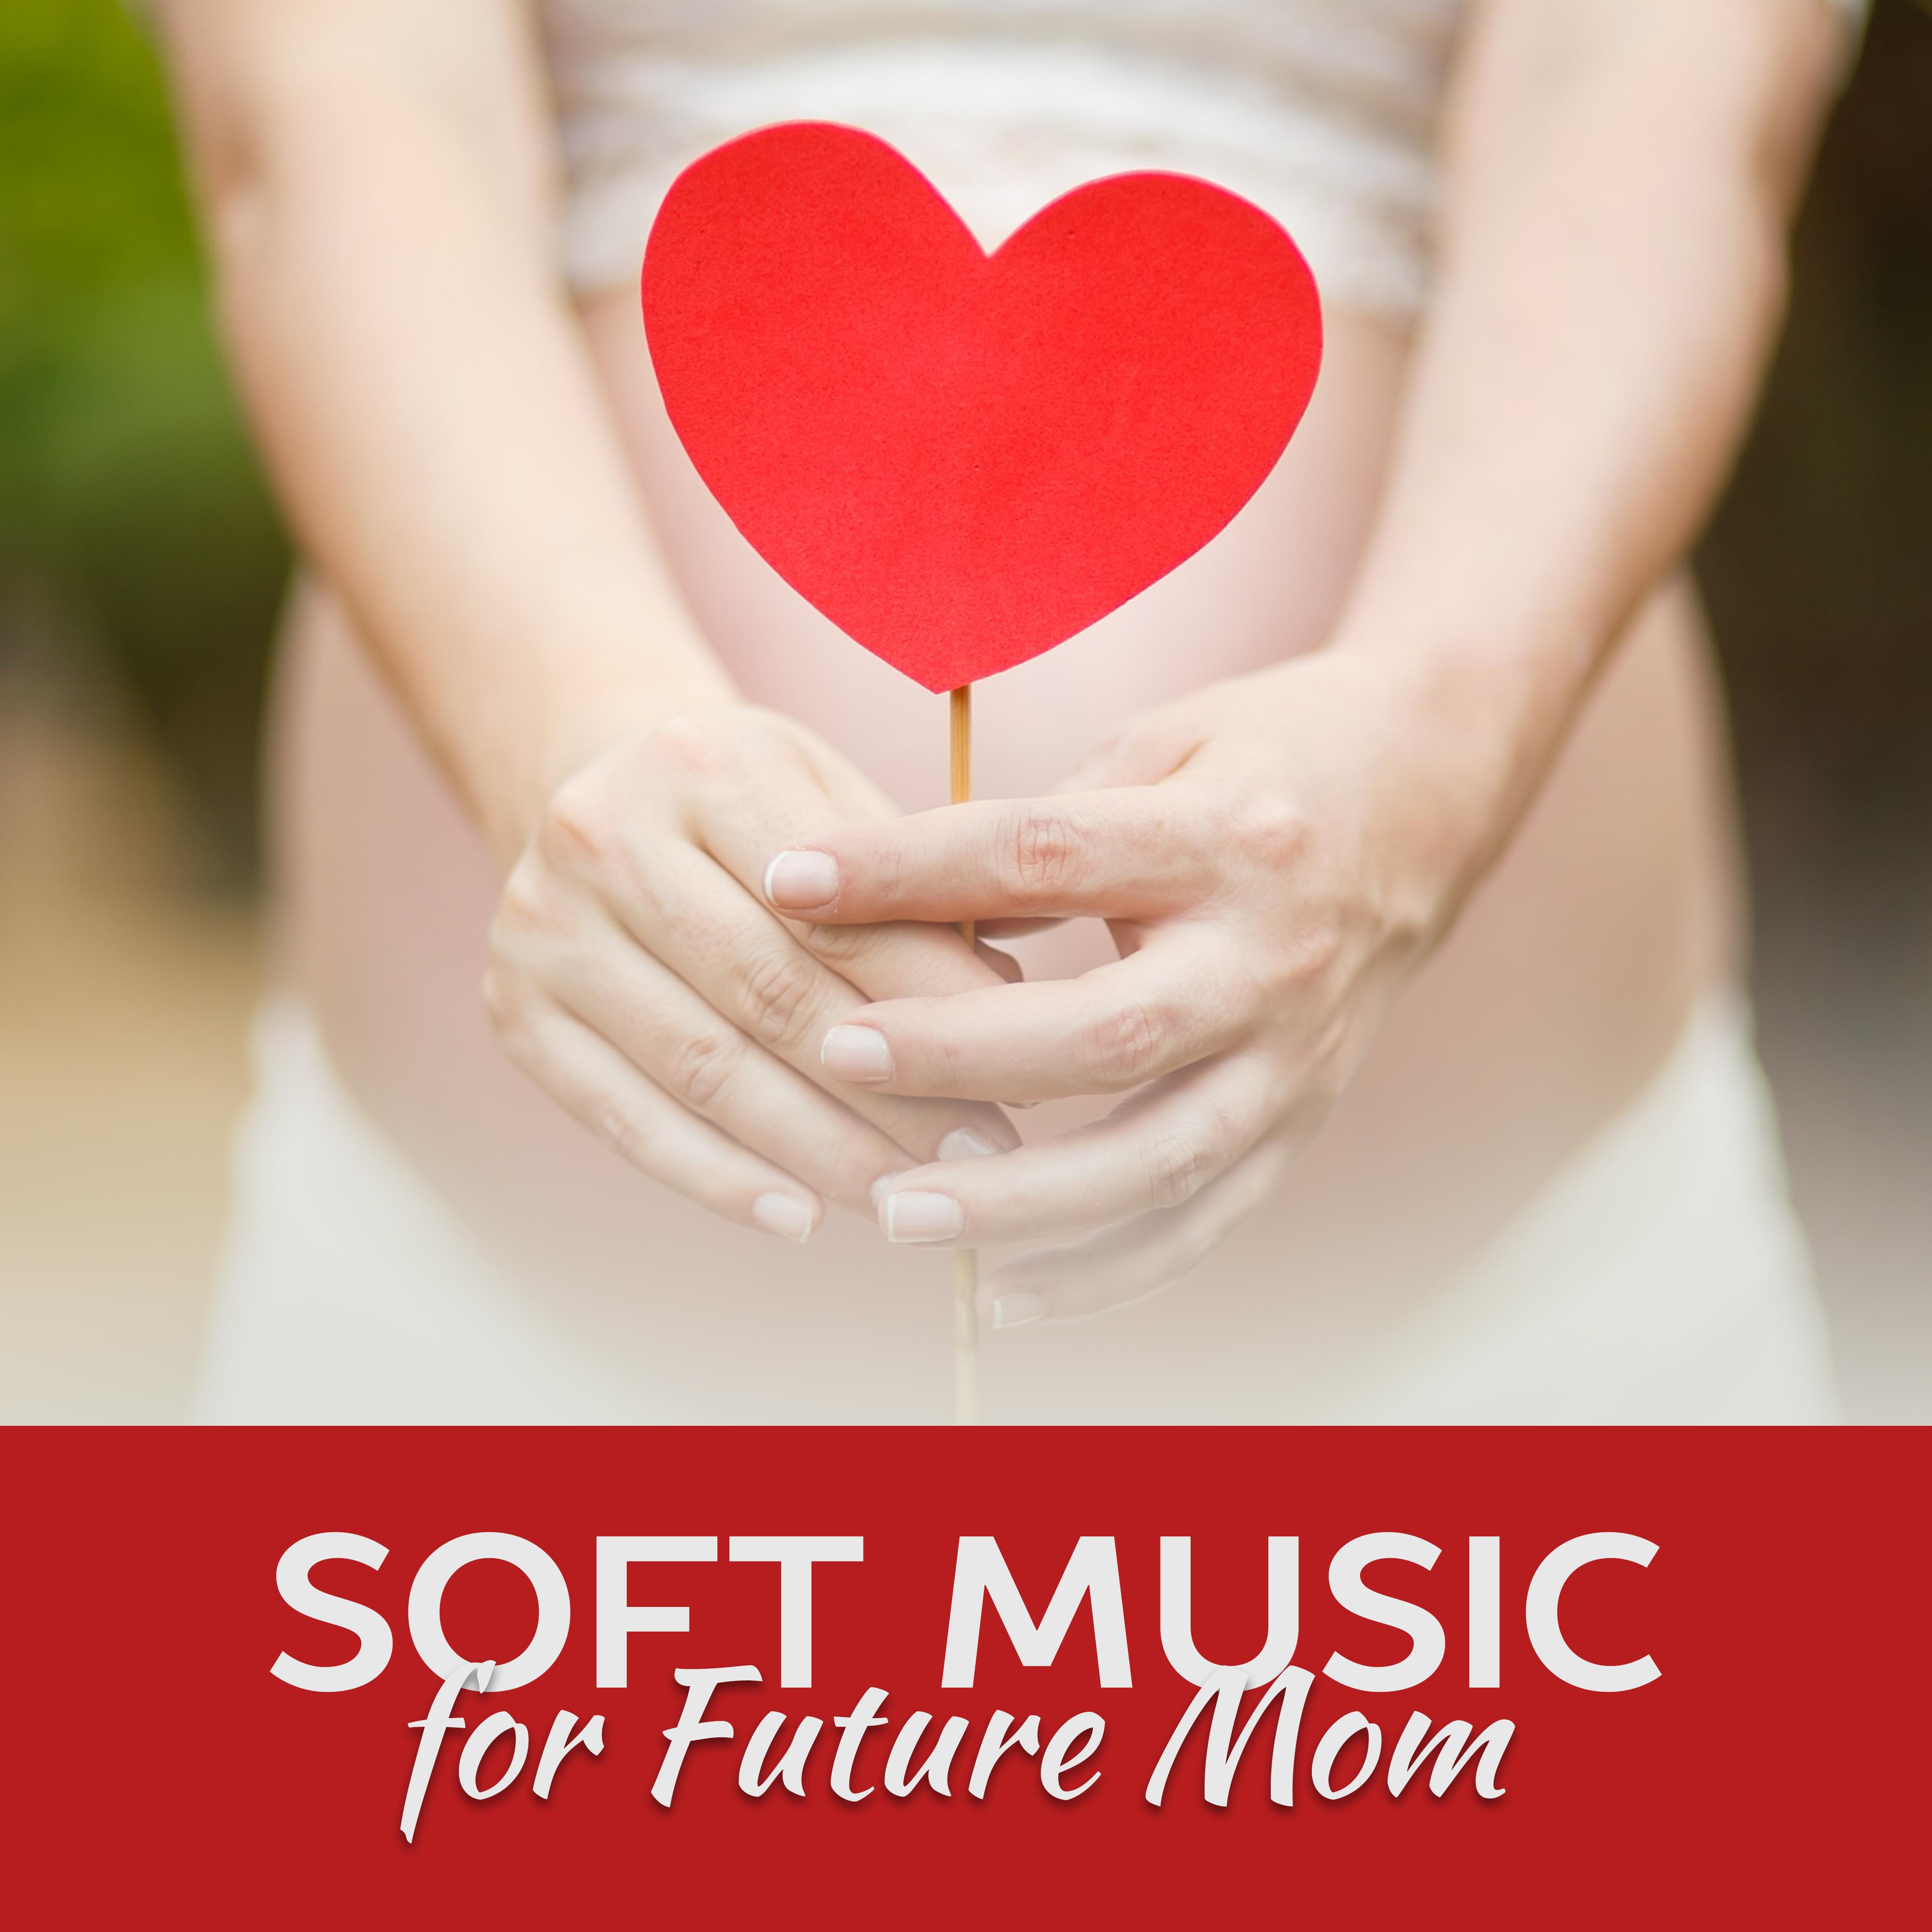 Soft Music for Future Mom  Therapy Sounds, Stress Relief, Relaxing Sounds to Rest, Peaceful Baby, Restful Sleep, Harmony